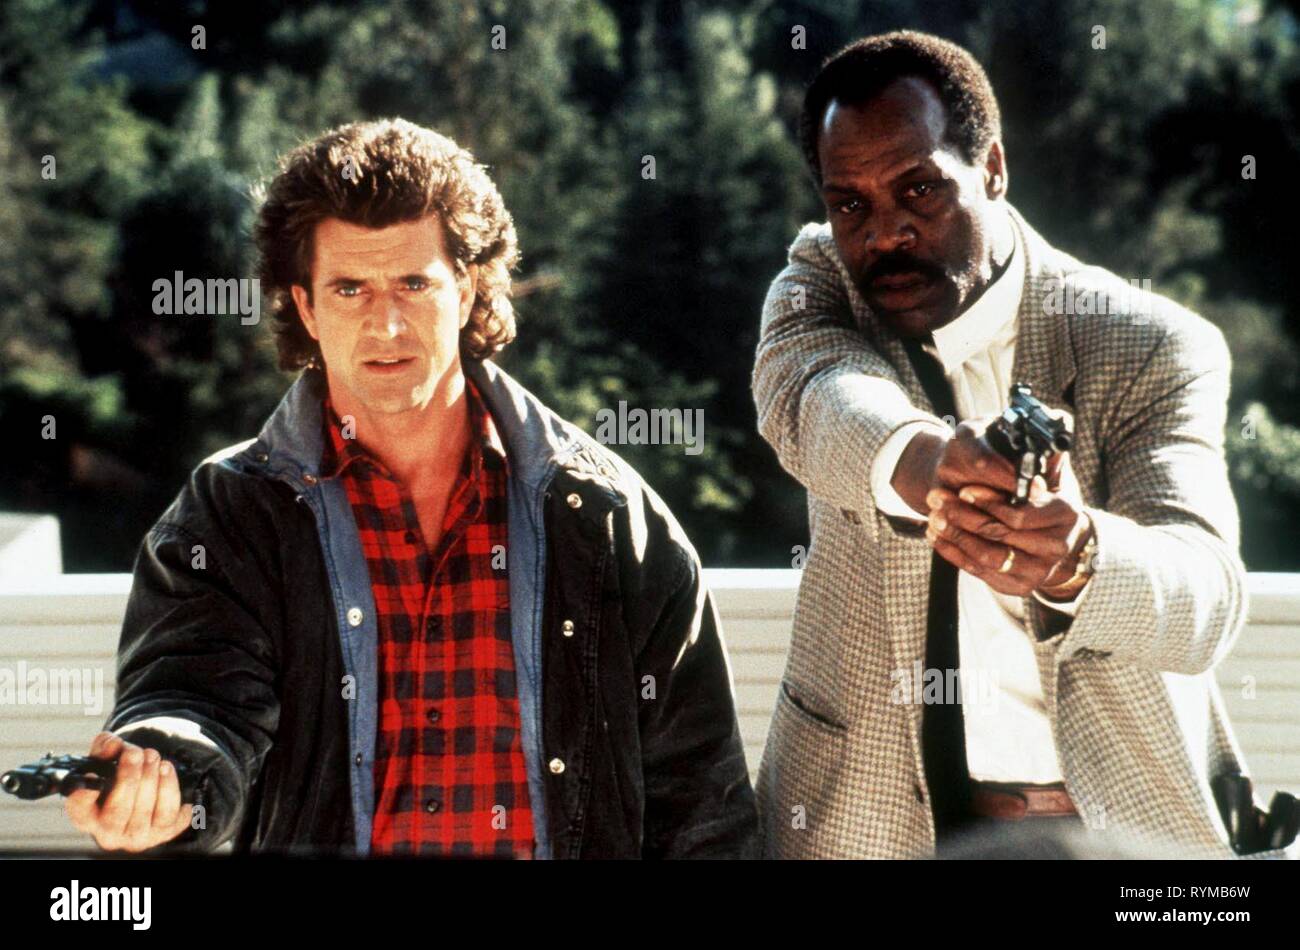 GIBSON, GLOVER, Lethal Weapon 2, 1989 Stockfoto